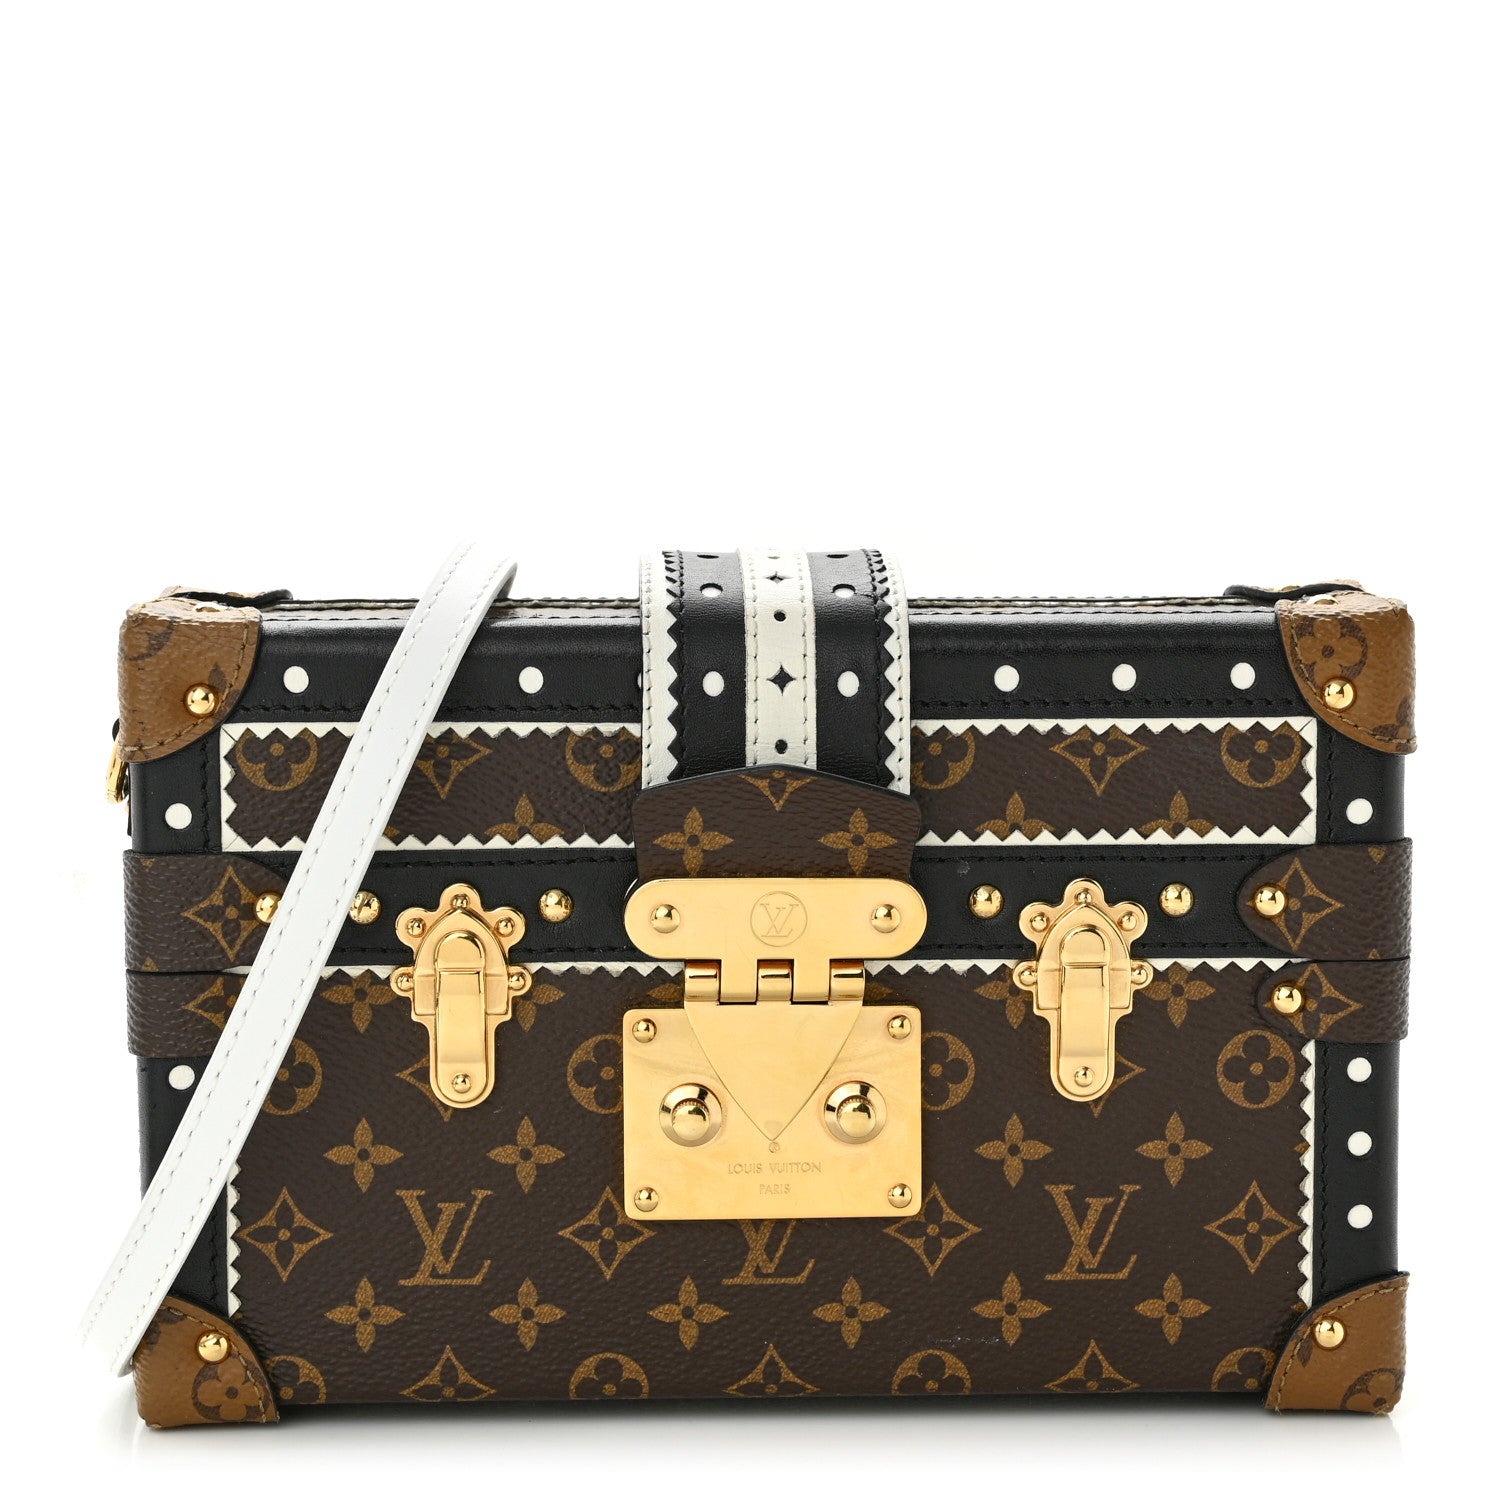 Most Expensive Louis Vuitton Bags petite malle trunk